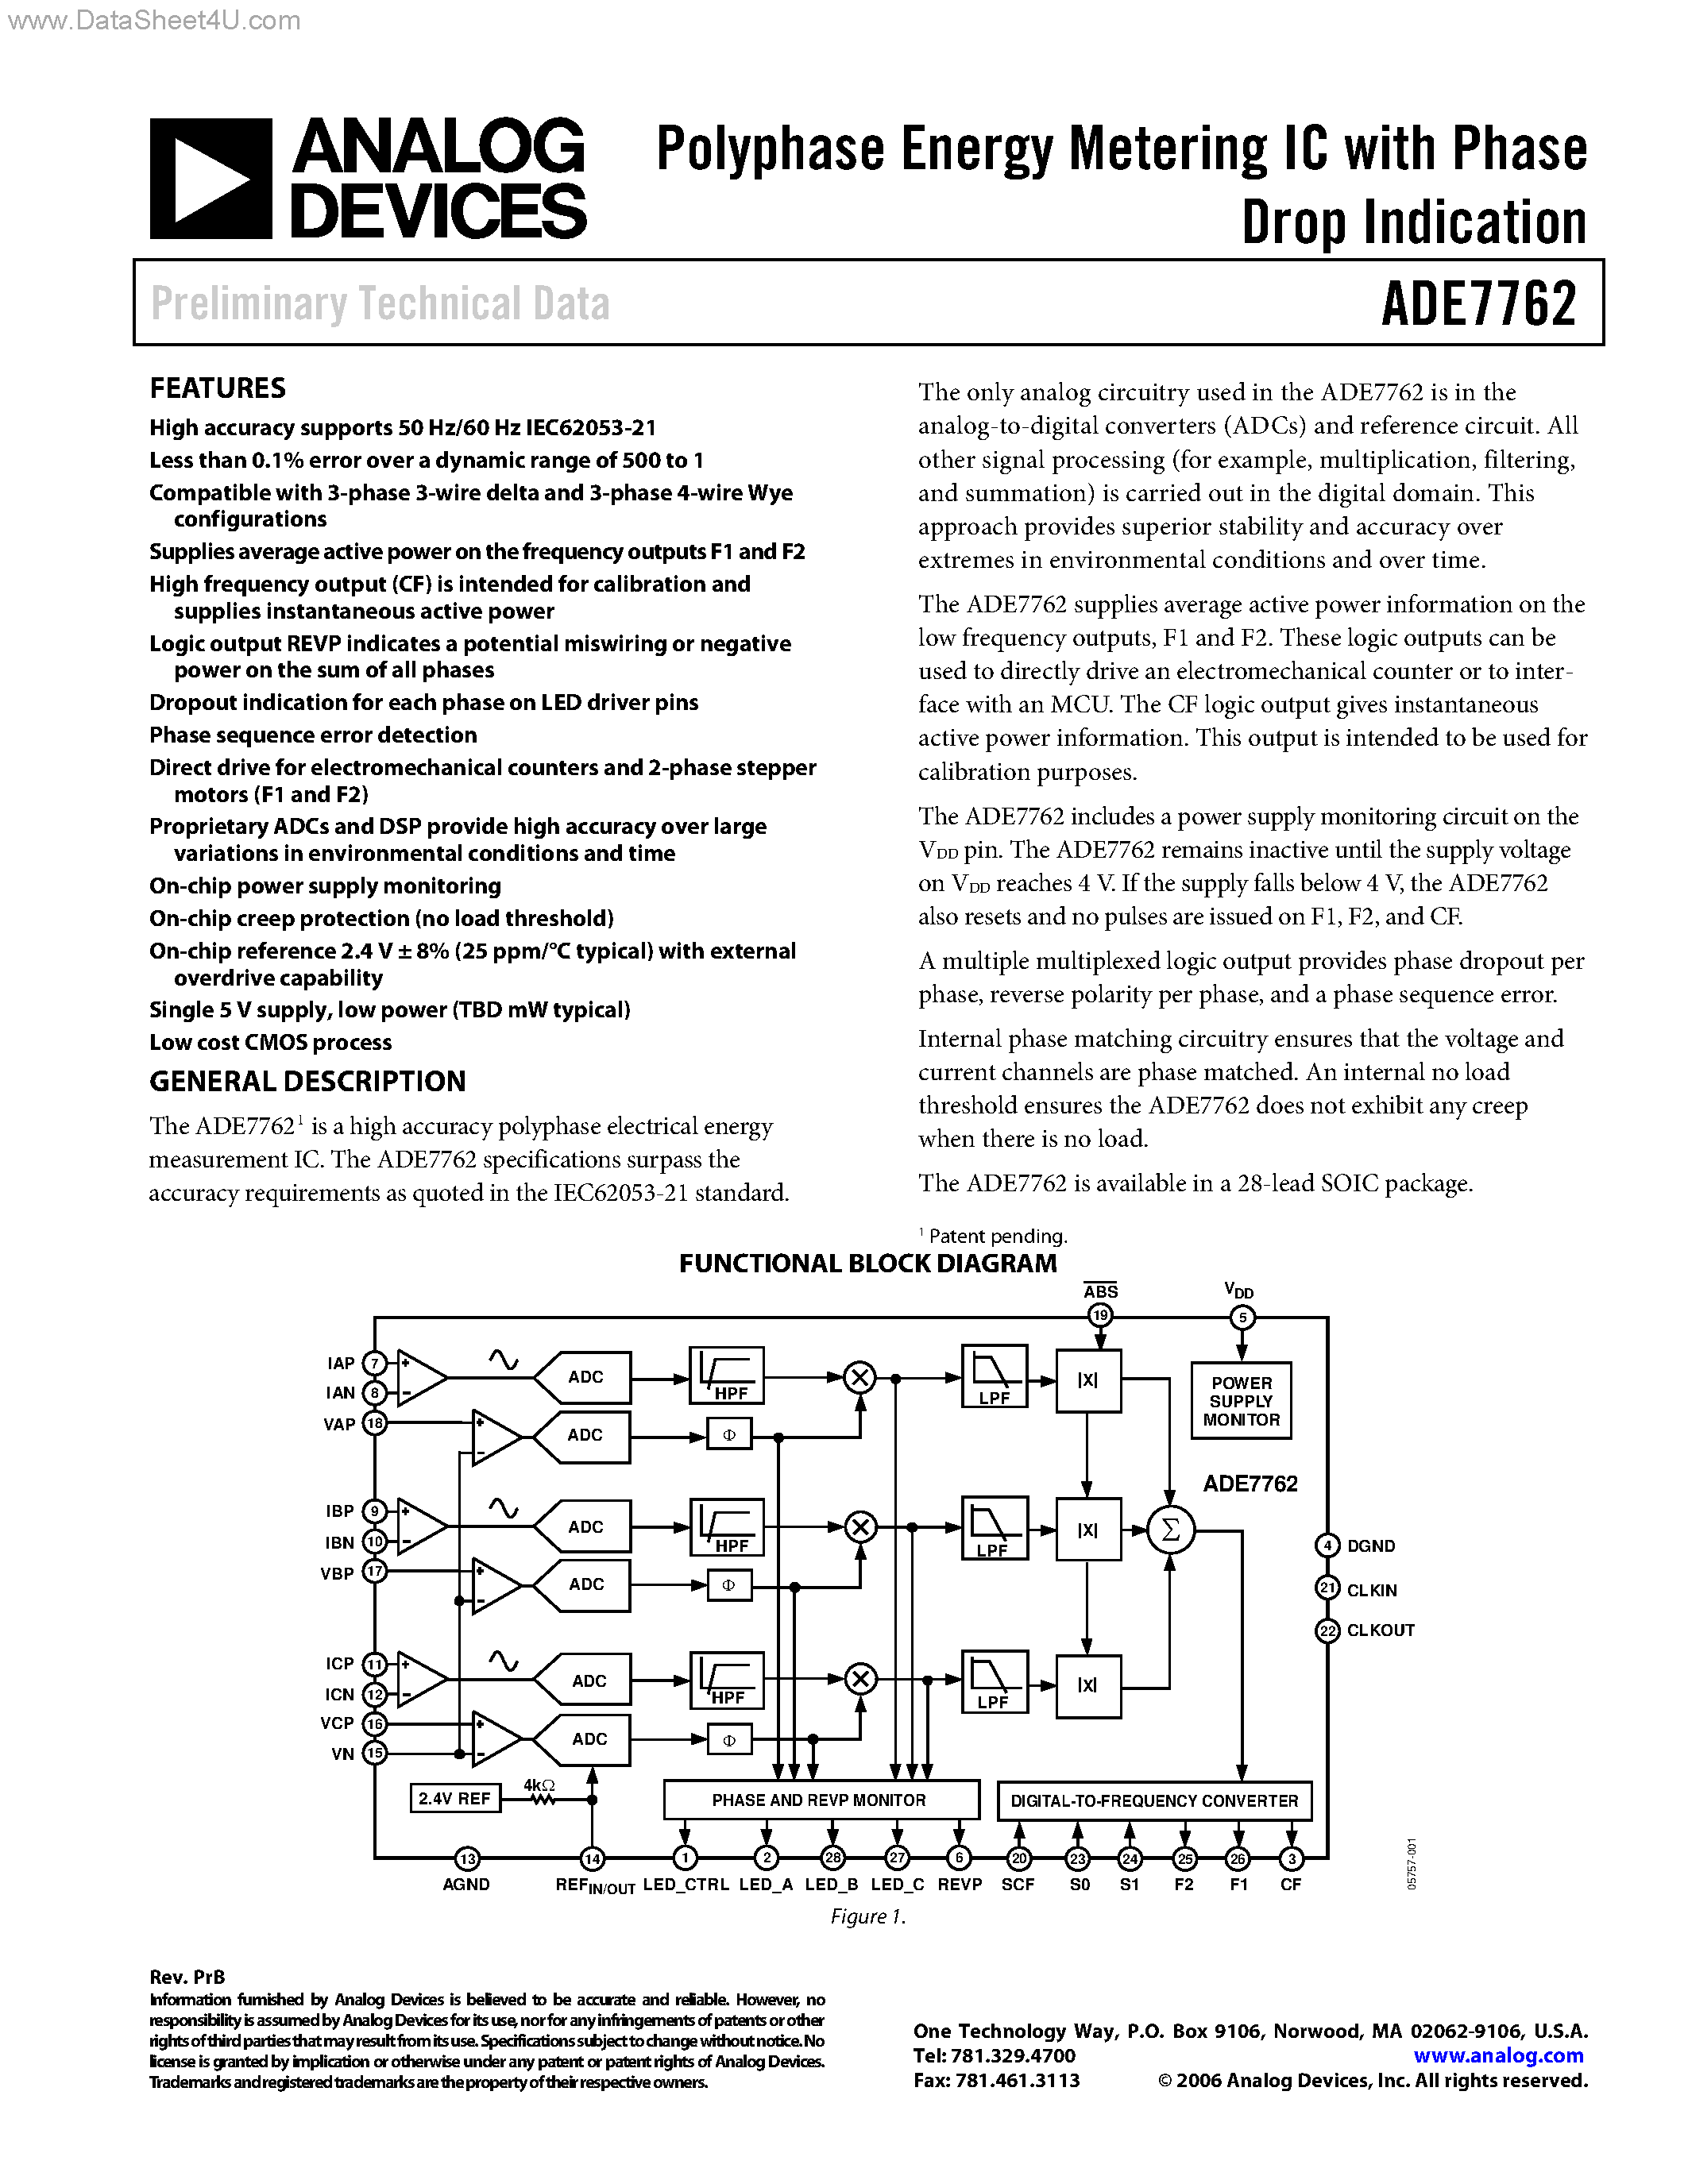 Даташит ADE7762 - Polyphase Energy Metering IC страница 1